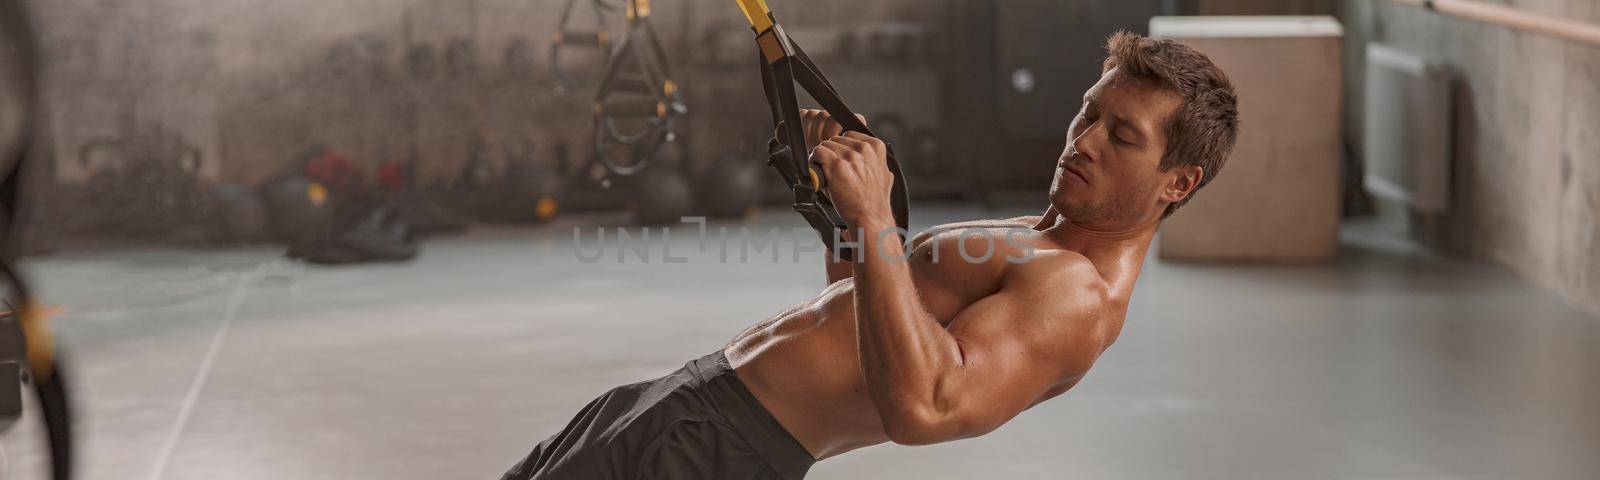 Attractive man intensivly training upper body chest muscles with fitness straps in sport fitness gym club